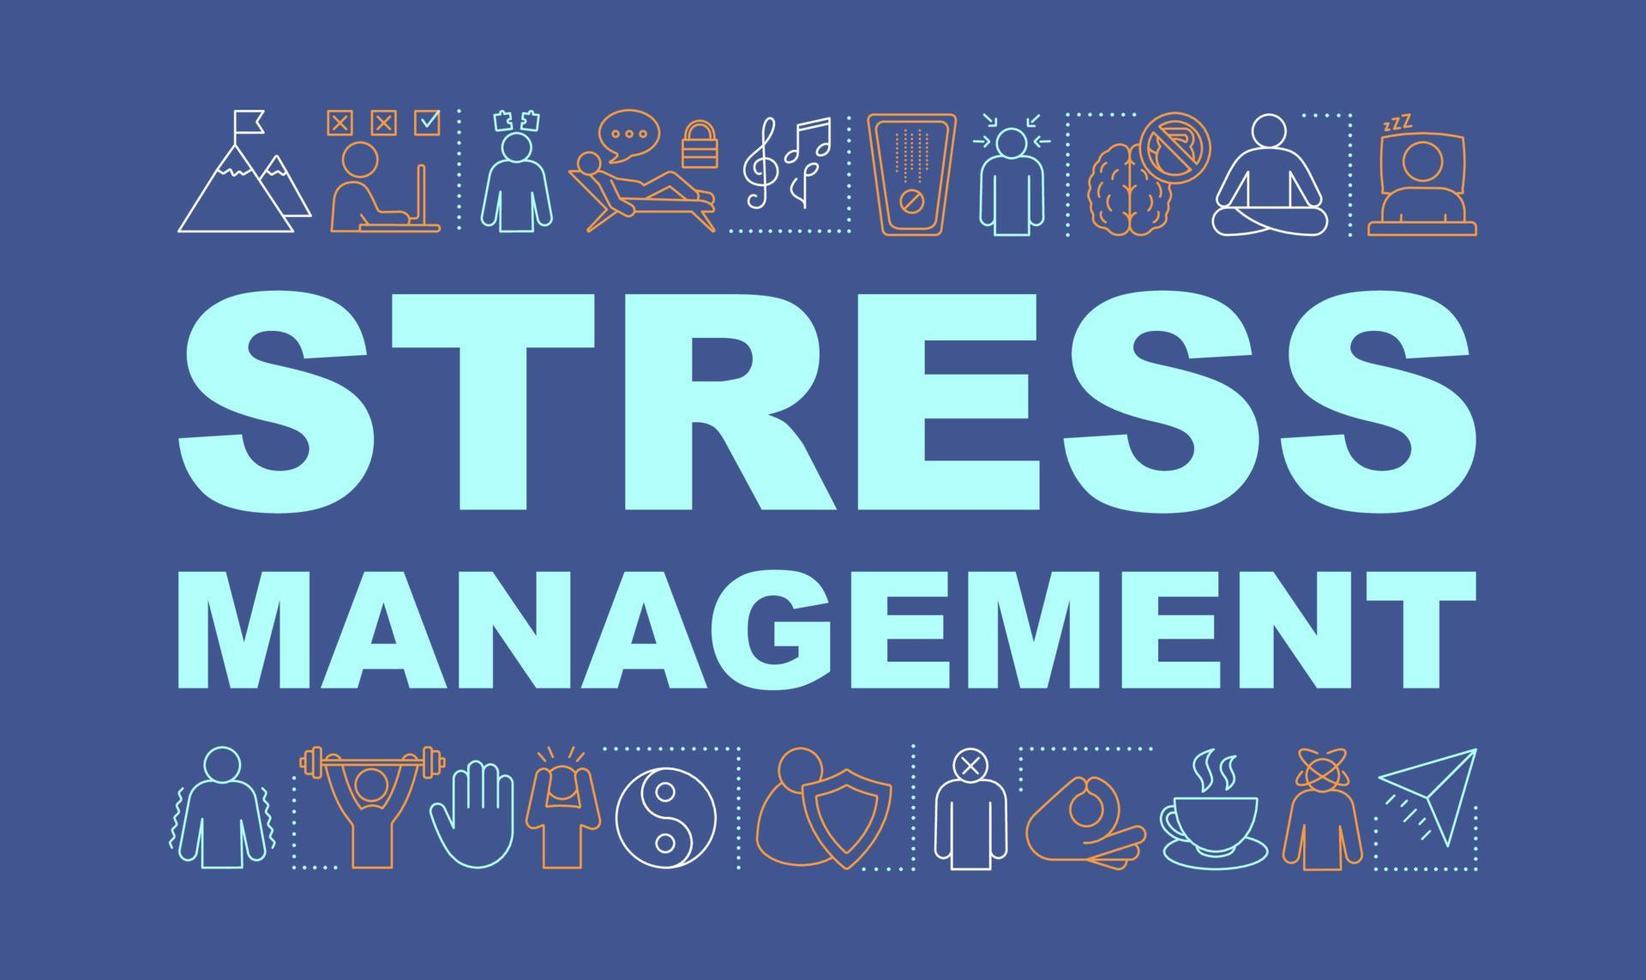 Stress management word concepts banner. Mental health. Stress overcoming. Calming and relaxing. Isolated typography idea with linear icons. Anxiety coping. Vector outline illustration